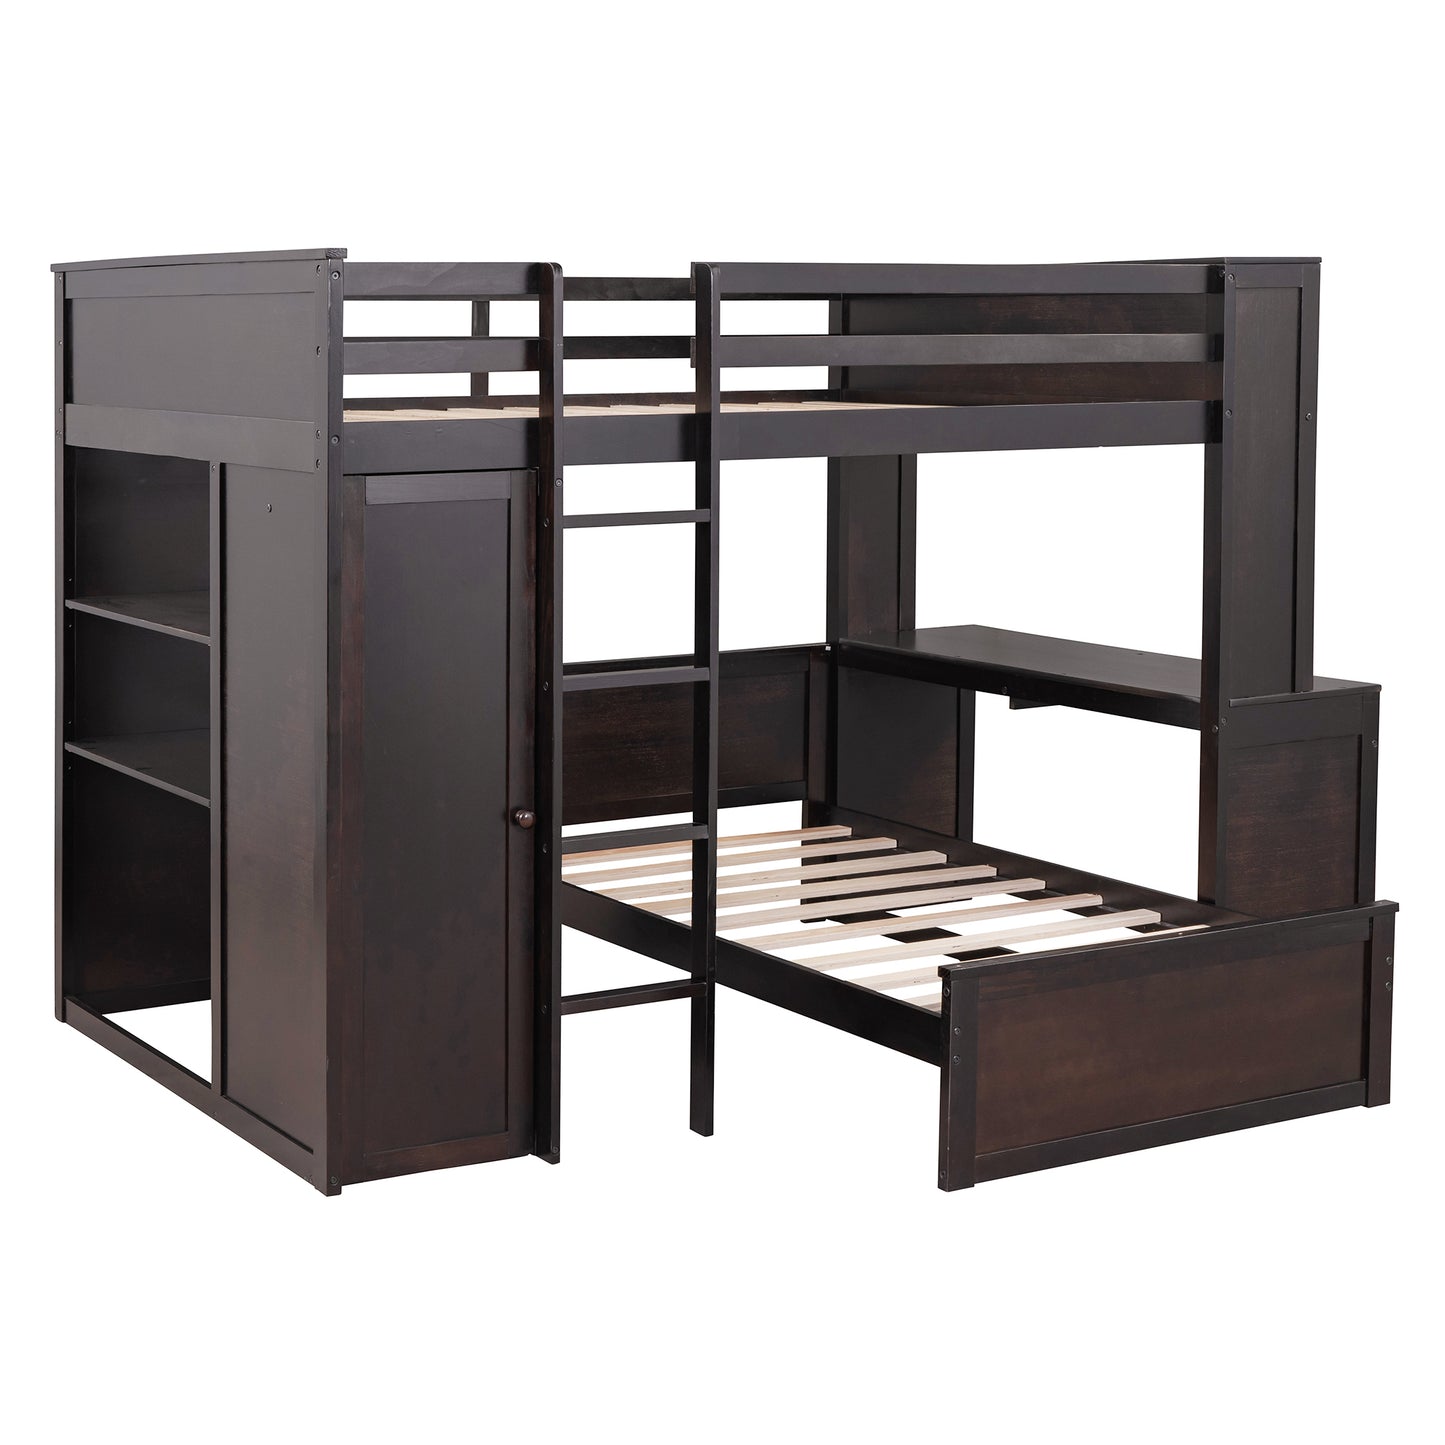 Full size Loft Bed with a twin size Stand-alone bed, Shelves,Desk,and Wardrobe-Espresso